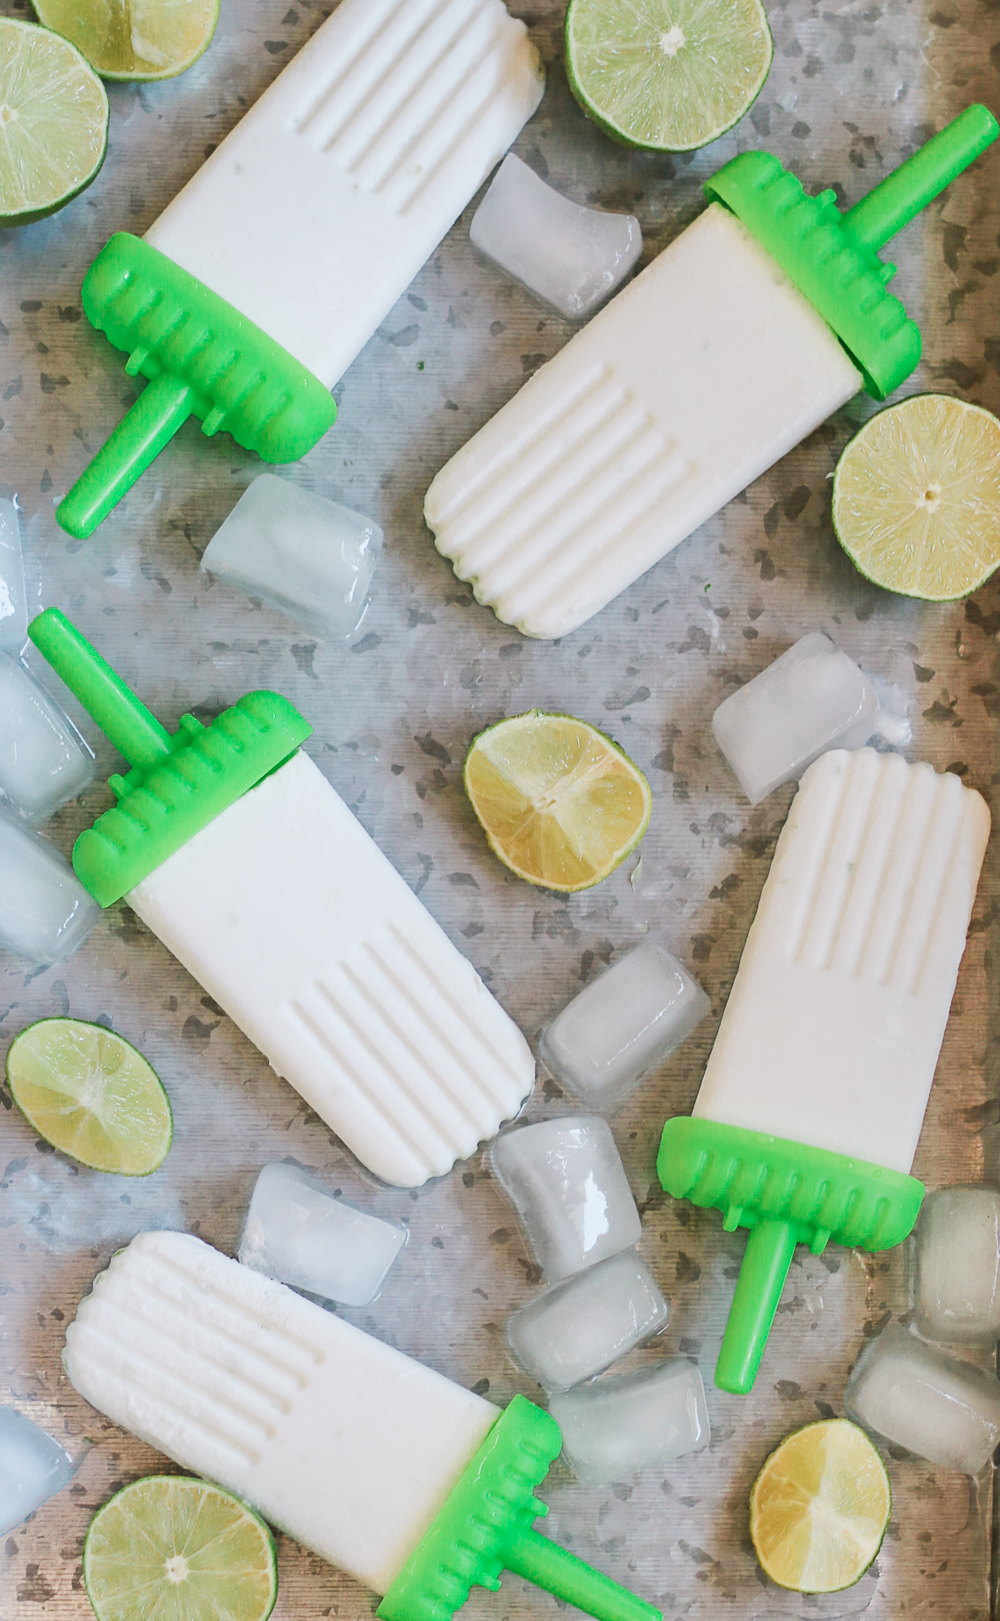 Boozy popsicles made with coconut milk and Malibu rum by blogger Stephanie Ziajka on Diary of a Debutante